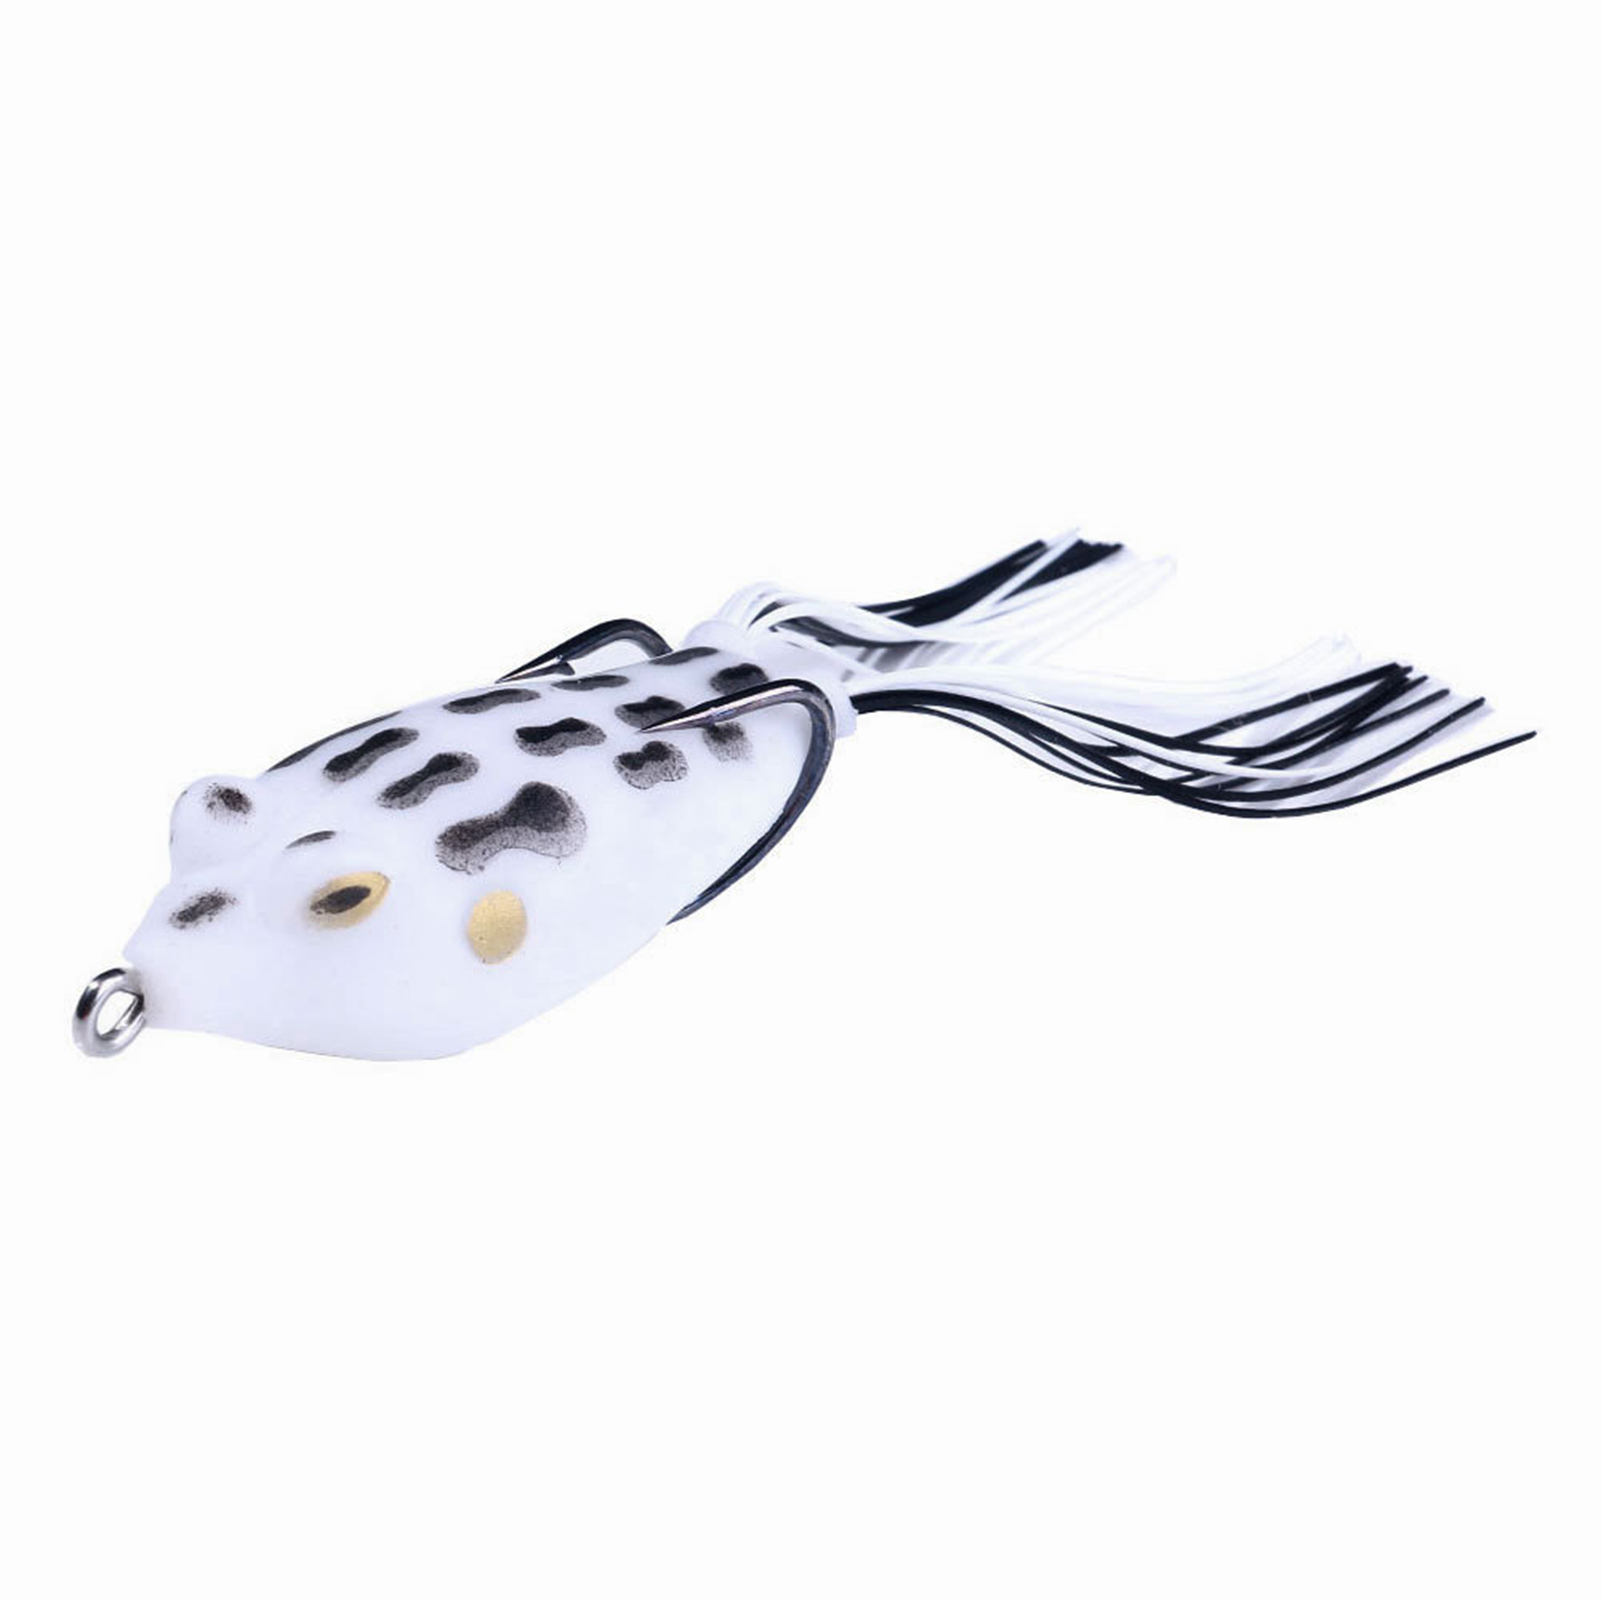 Lure Bright Color Topwater Silicone Snakehead Fishing Frog Lure